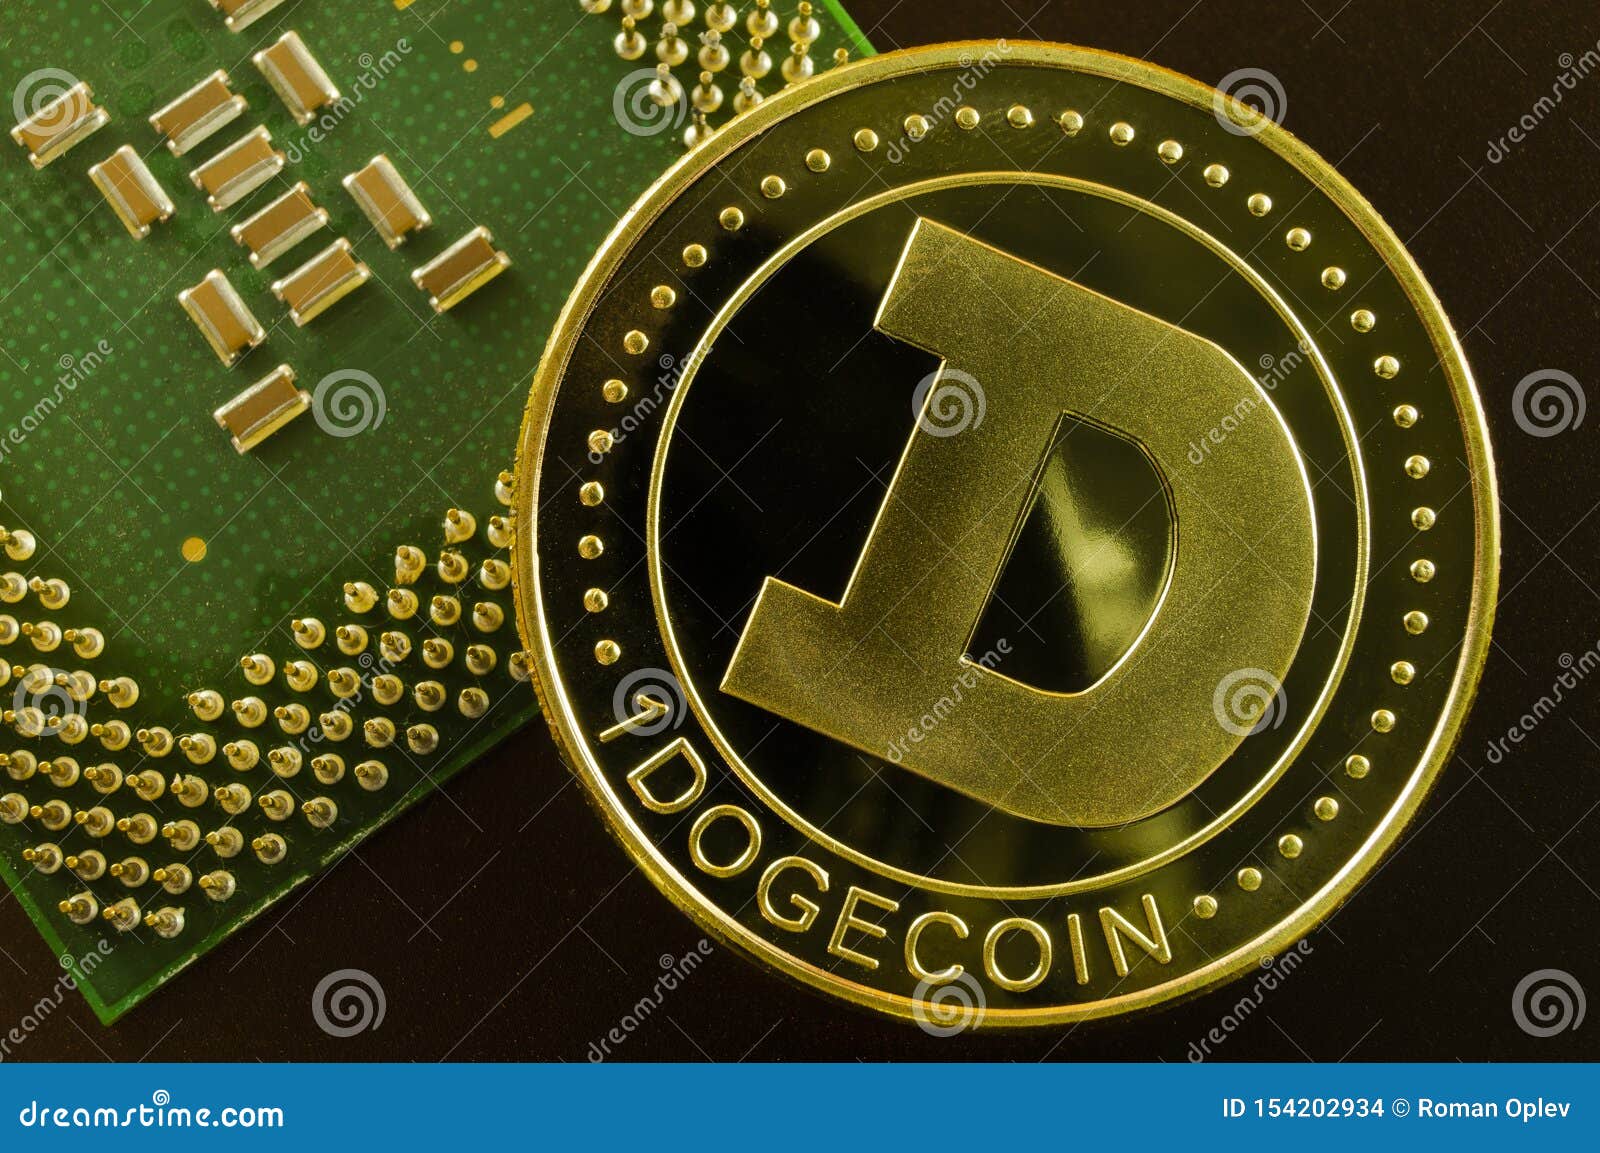 crypto exchange with dogecoin